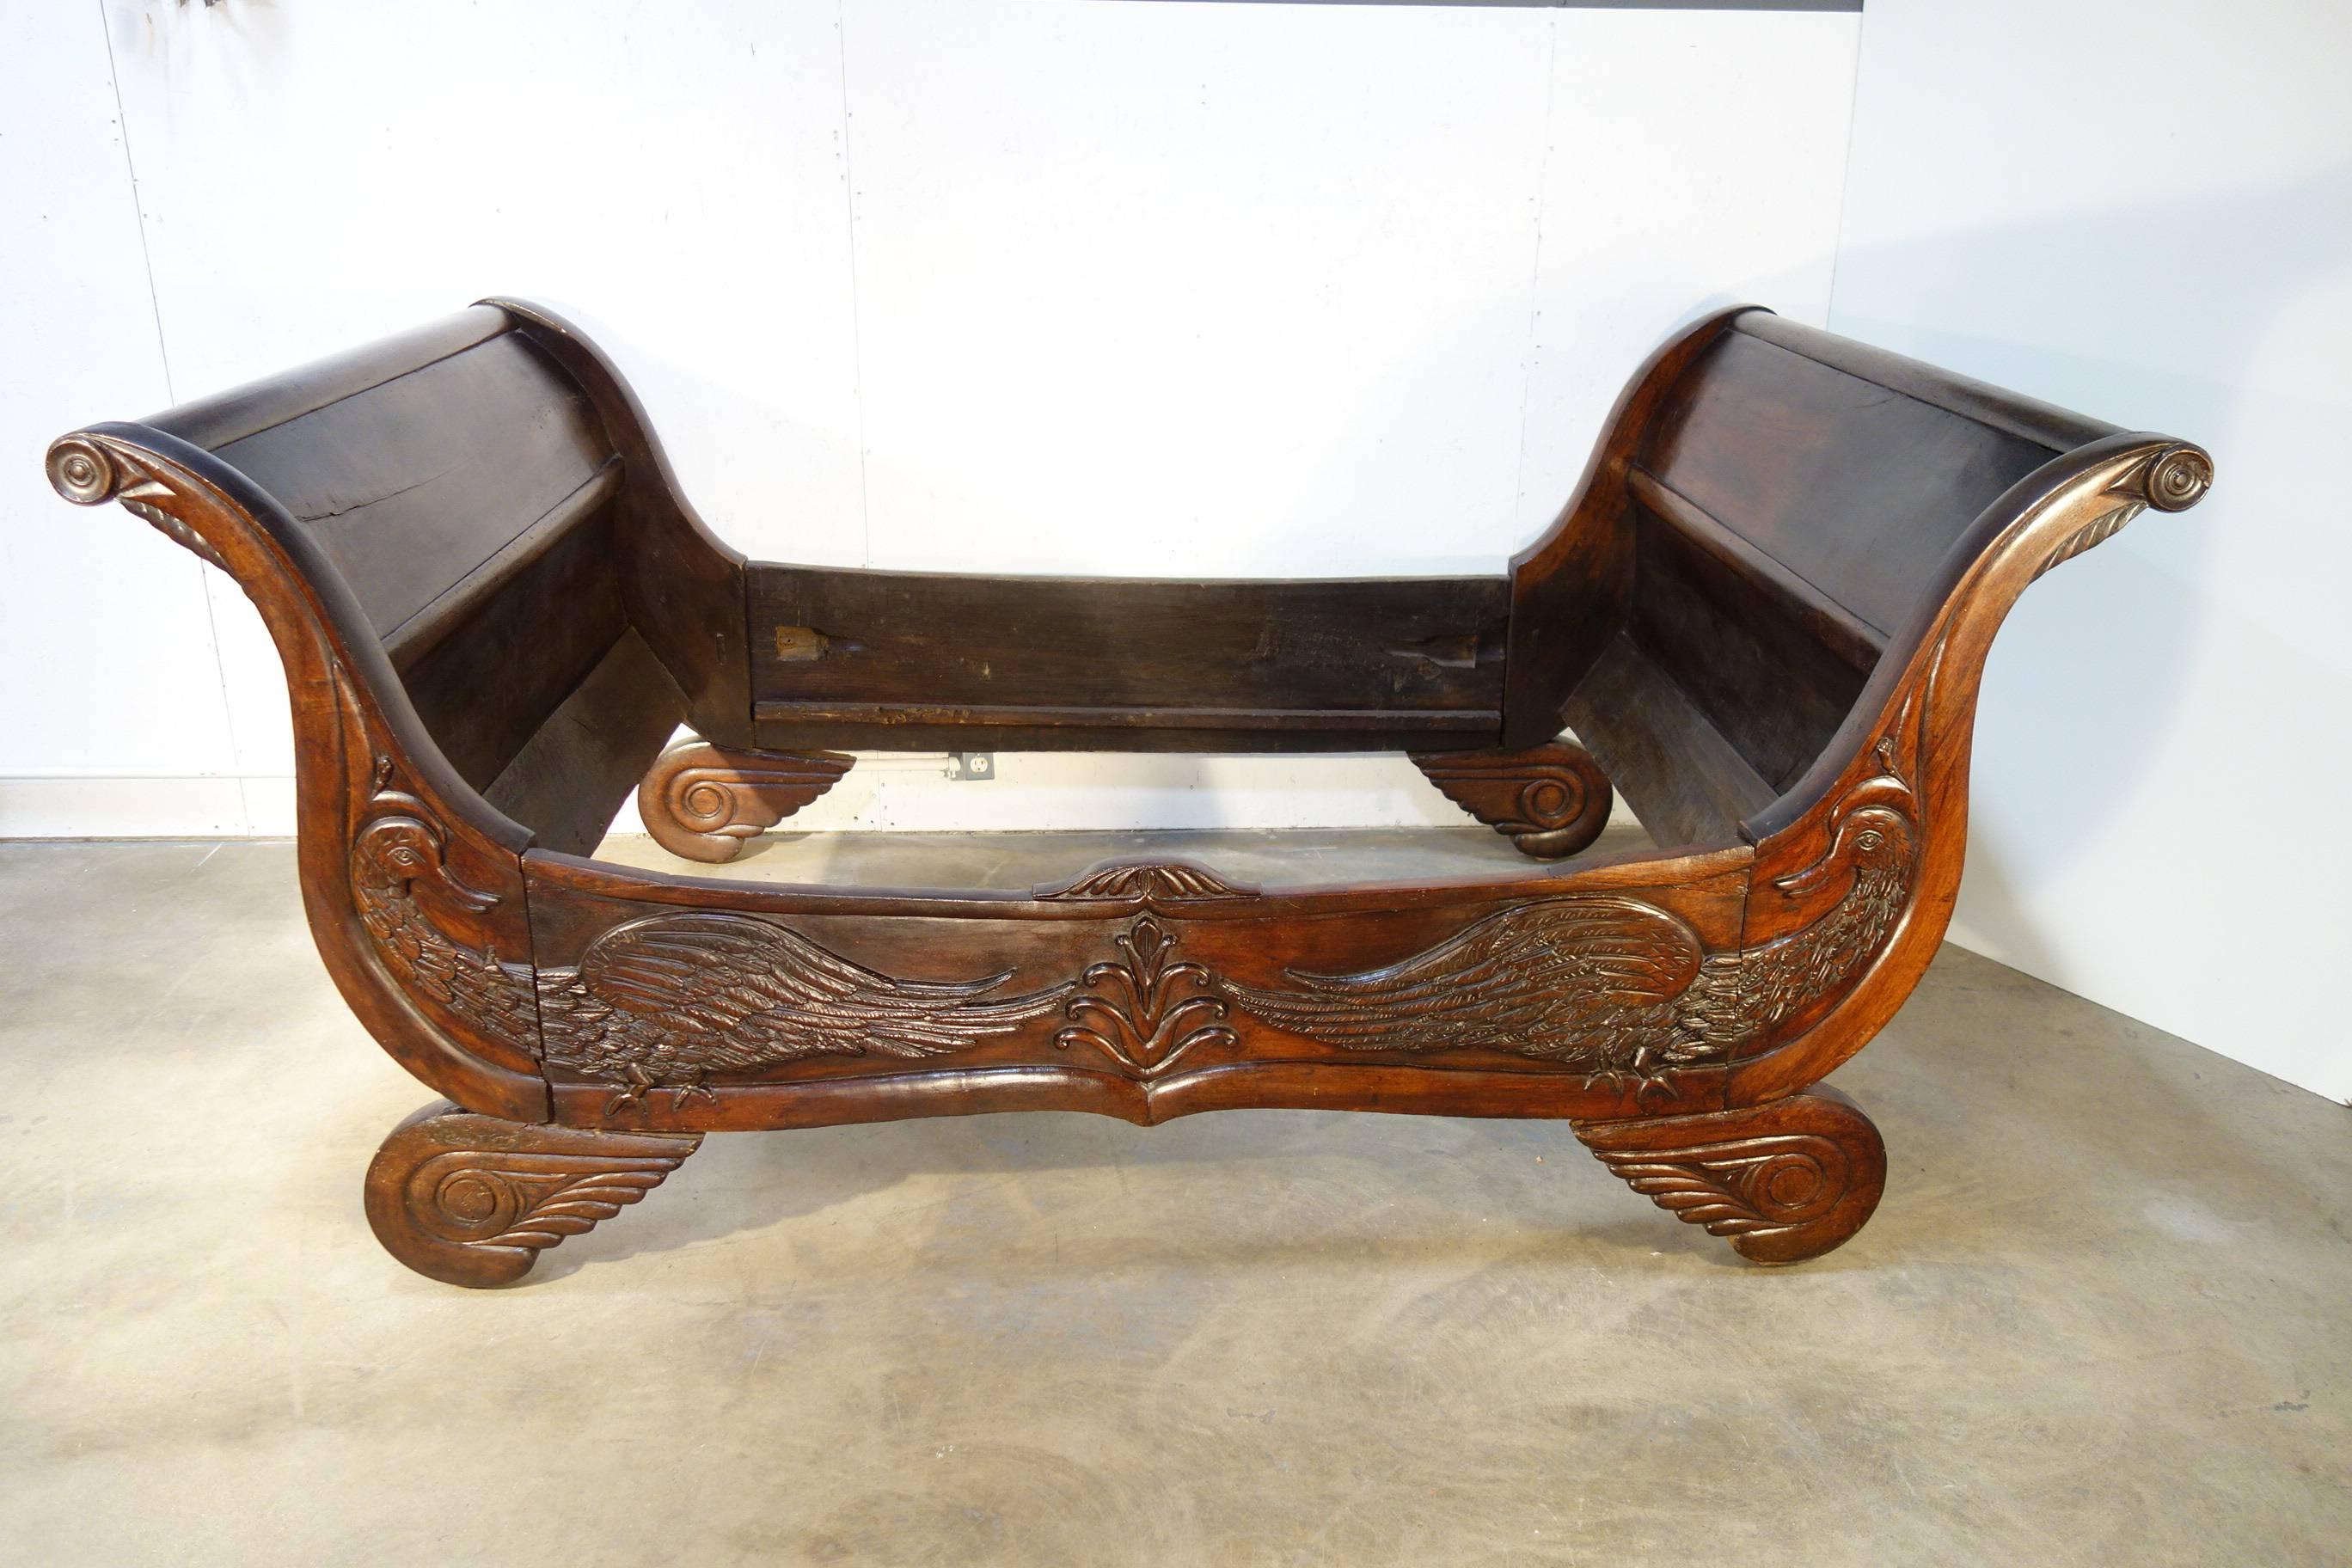 Italian antique daybed, elaborately hand-carved with swans. Solid dark walnut. Piedmont, circa 1820. Wonderful details on swans and foot. Only the front face it is carved, the back it is plain and unfinished. There are couple of old restoration on